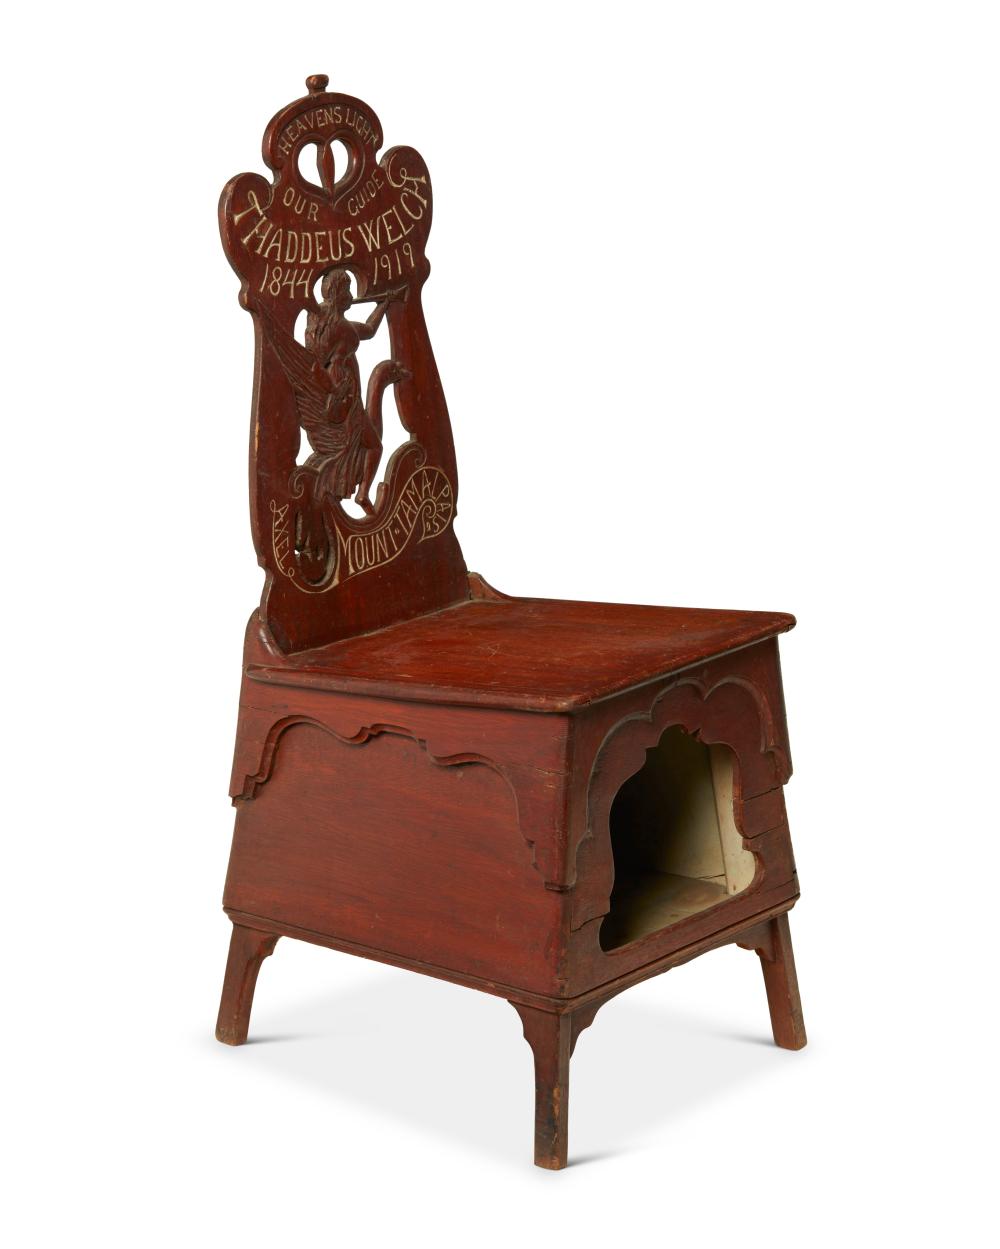 A CARVED SIDE CHAIR COMMEMORATING 2eed2f